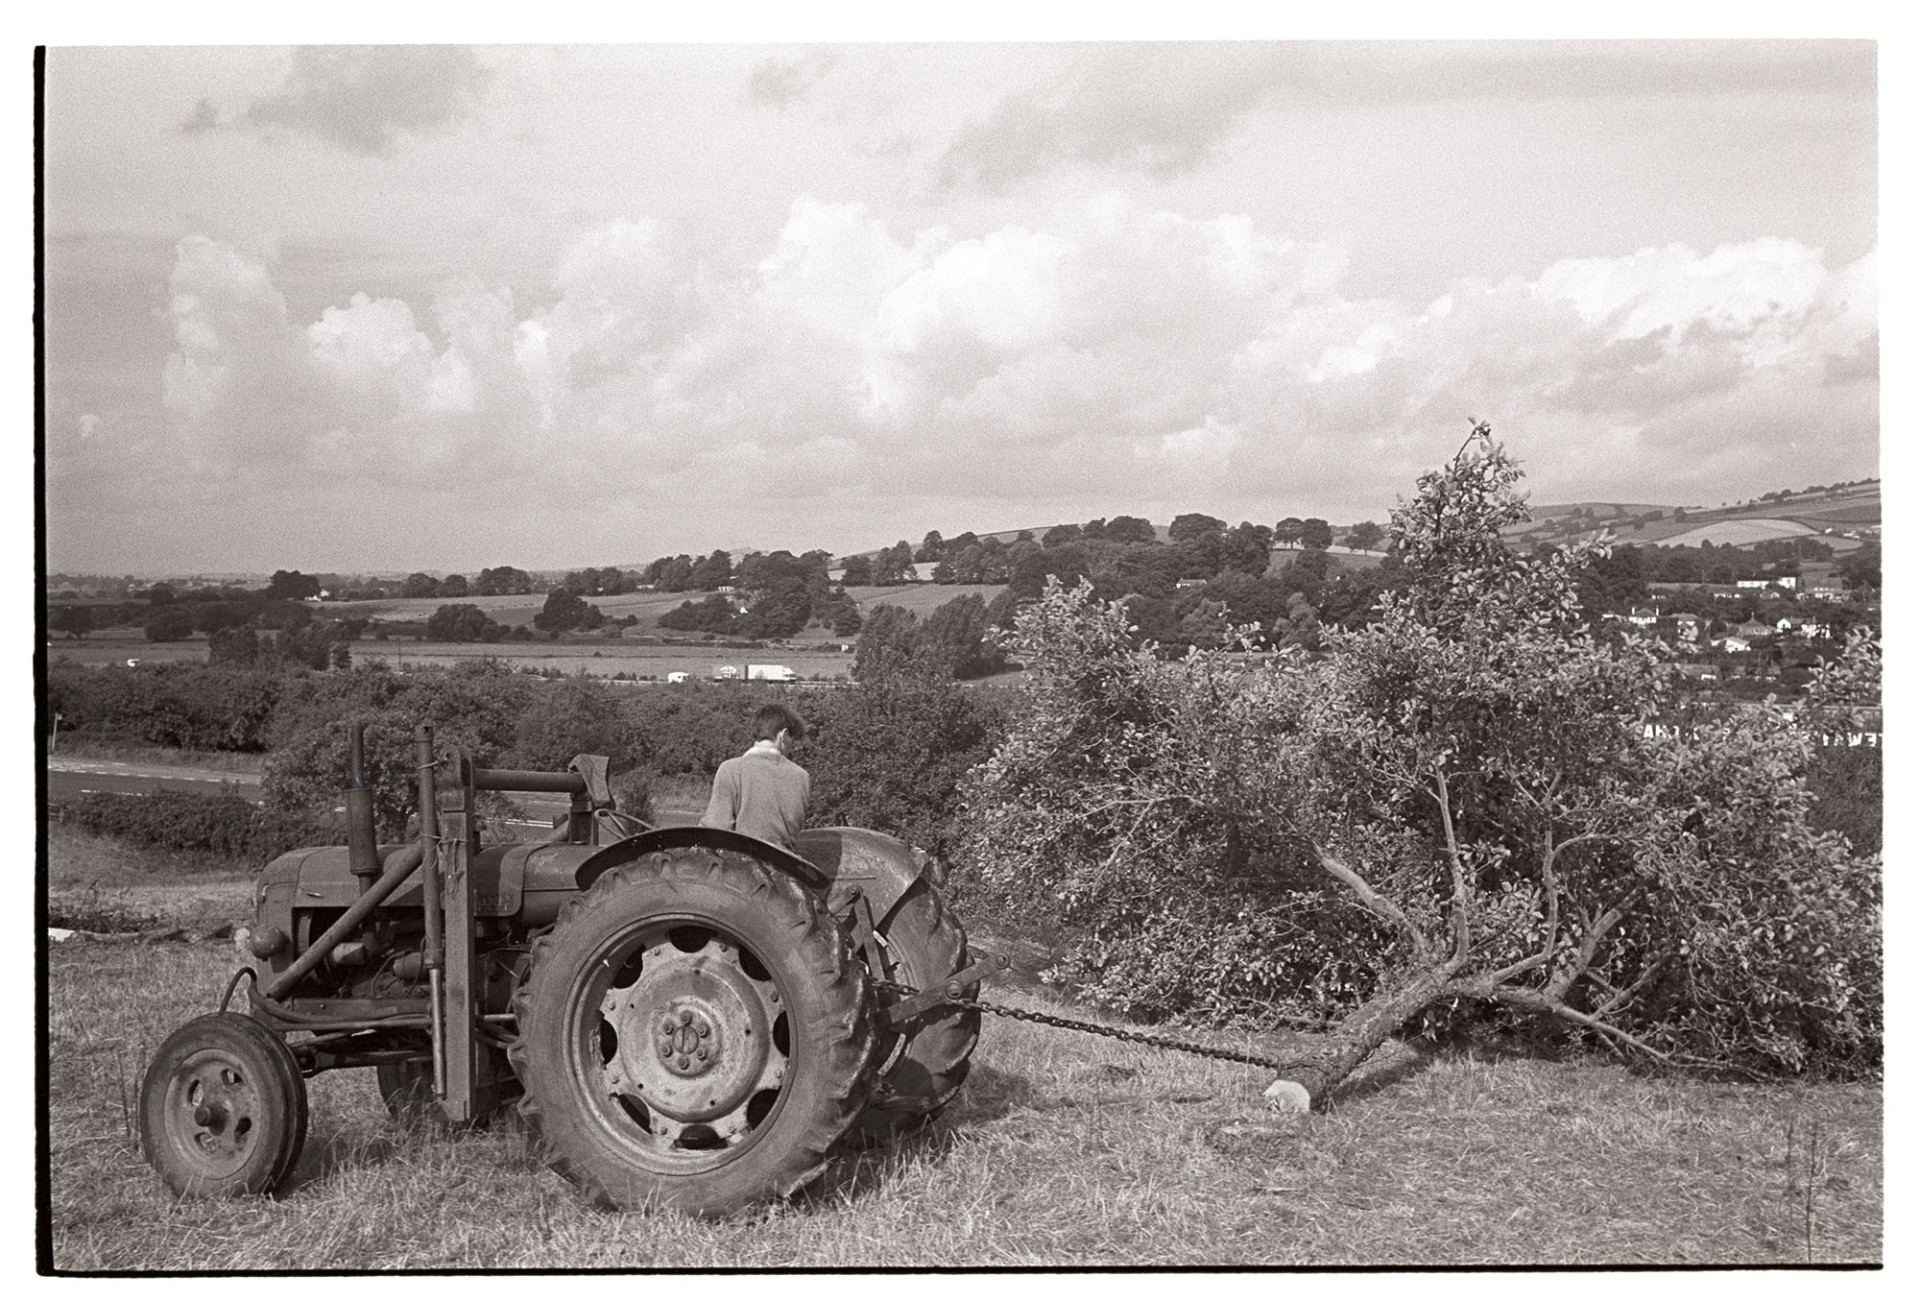 Orchards, tractor pulling up trees to clear orchard. 
[A tractor clearing an orchard at Hele, South Devon. One of the fruit trees is being dragged behind the tractor with a chain. Trees, fields, a village and clouds are visible in the background.]